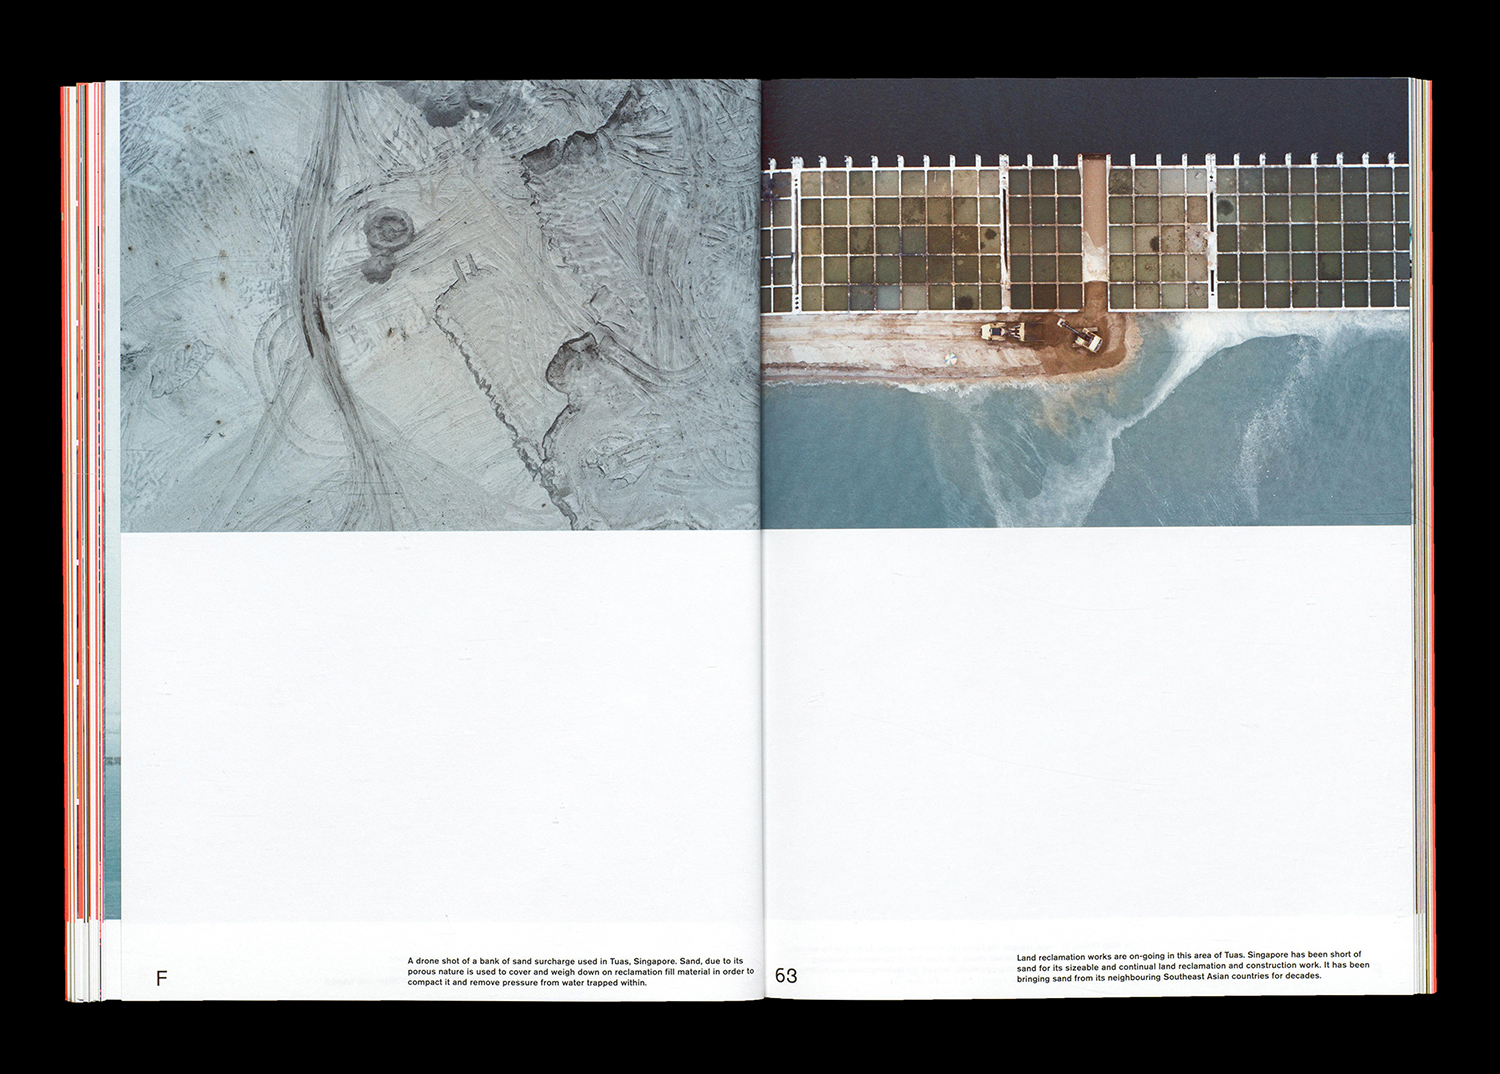 Migrant Journal No.5 Micro Odysseys edited by Justinien Tribillon, Michaela Büsse and Dámaso Randulfe, co-edited and designed by Offshore Studio